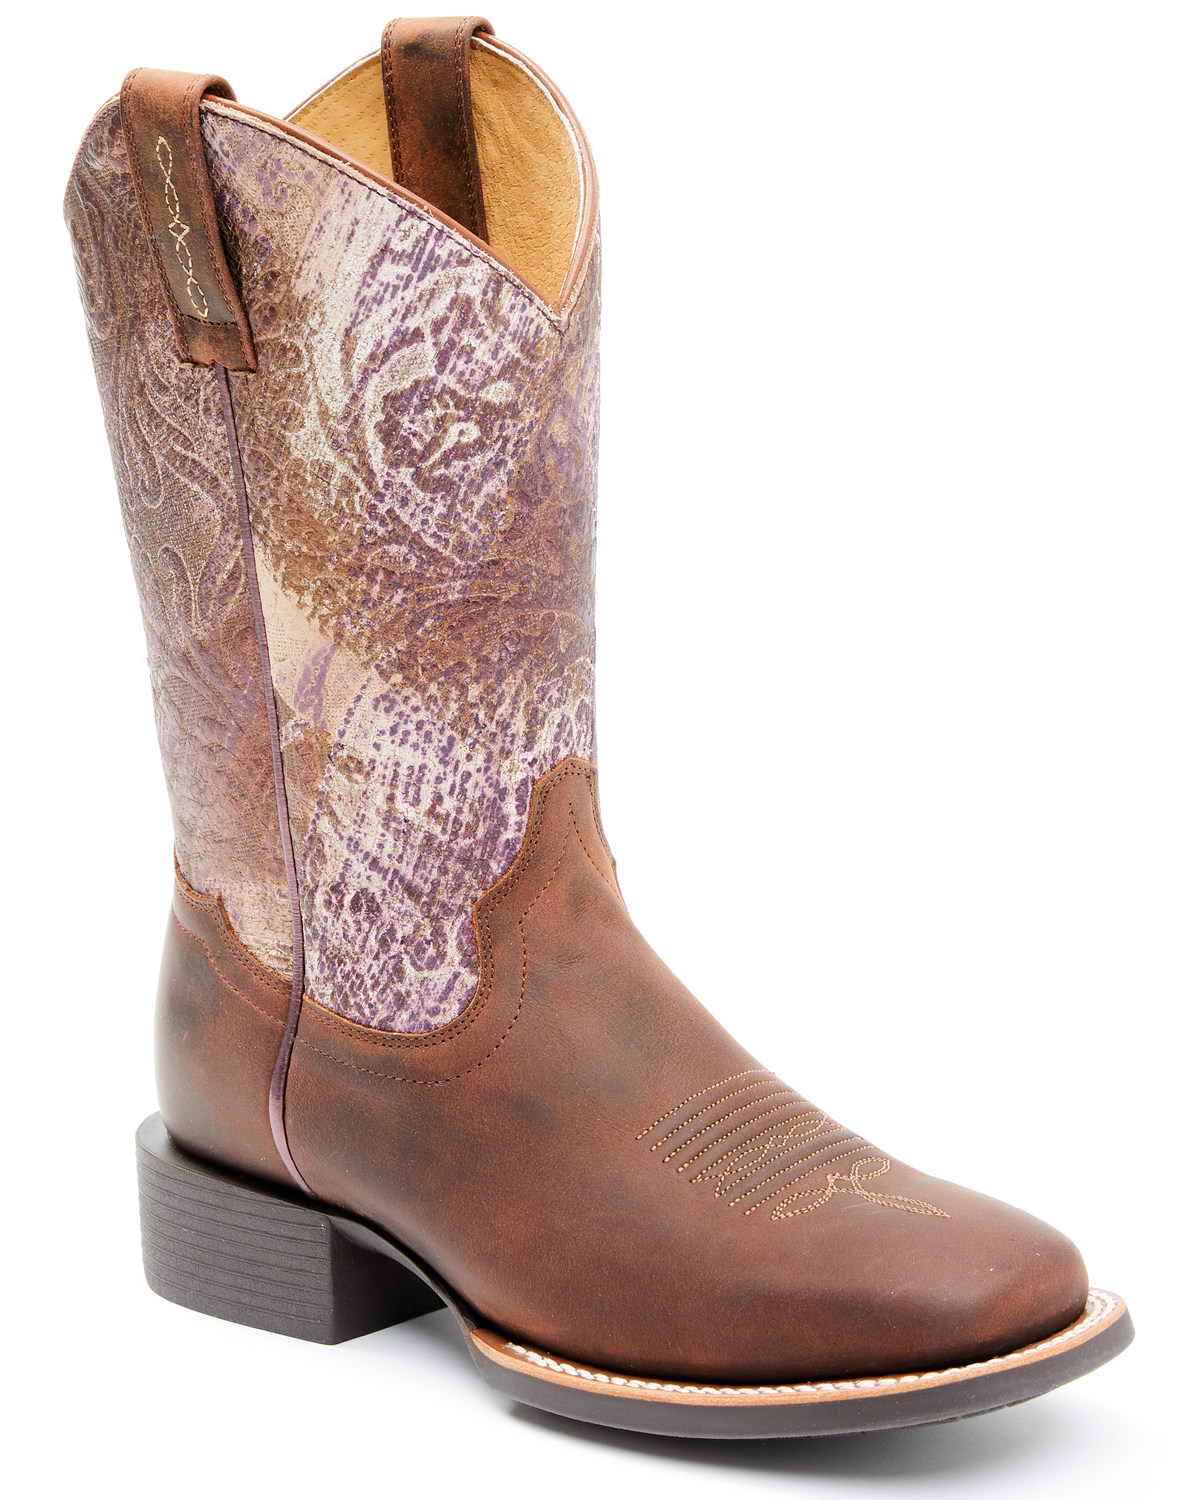 Shyanne Women's Antiquity Western Performance Boots - Broad Square Toe